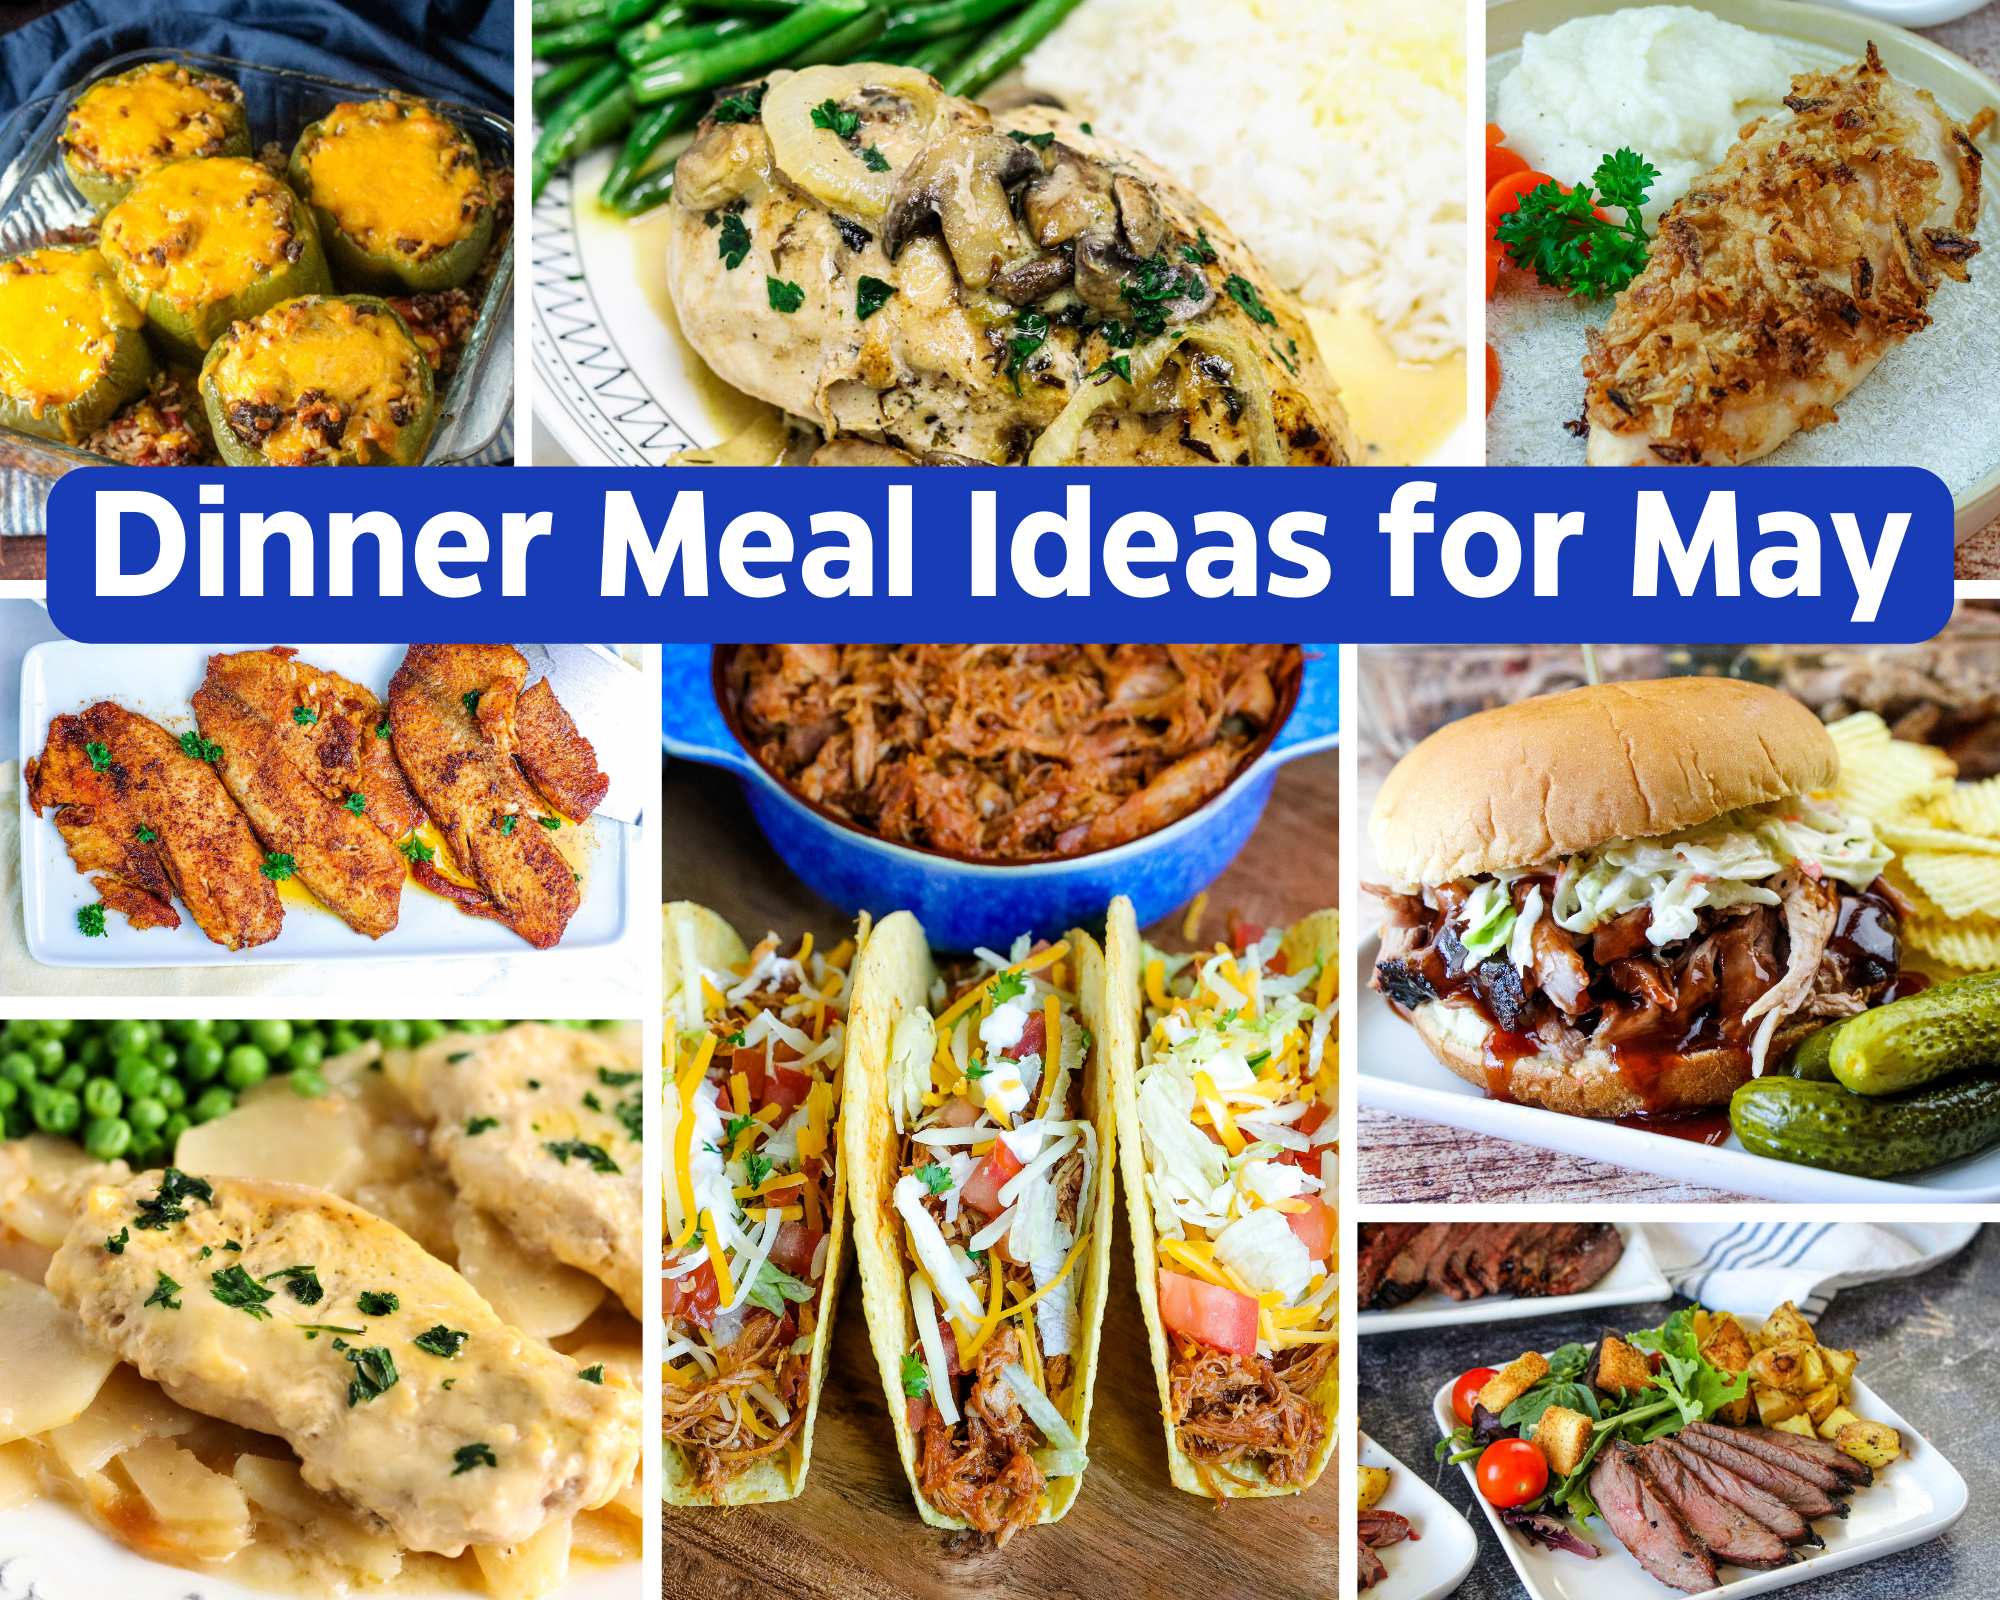 Dinner Meal Ideas for May